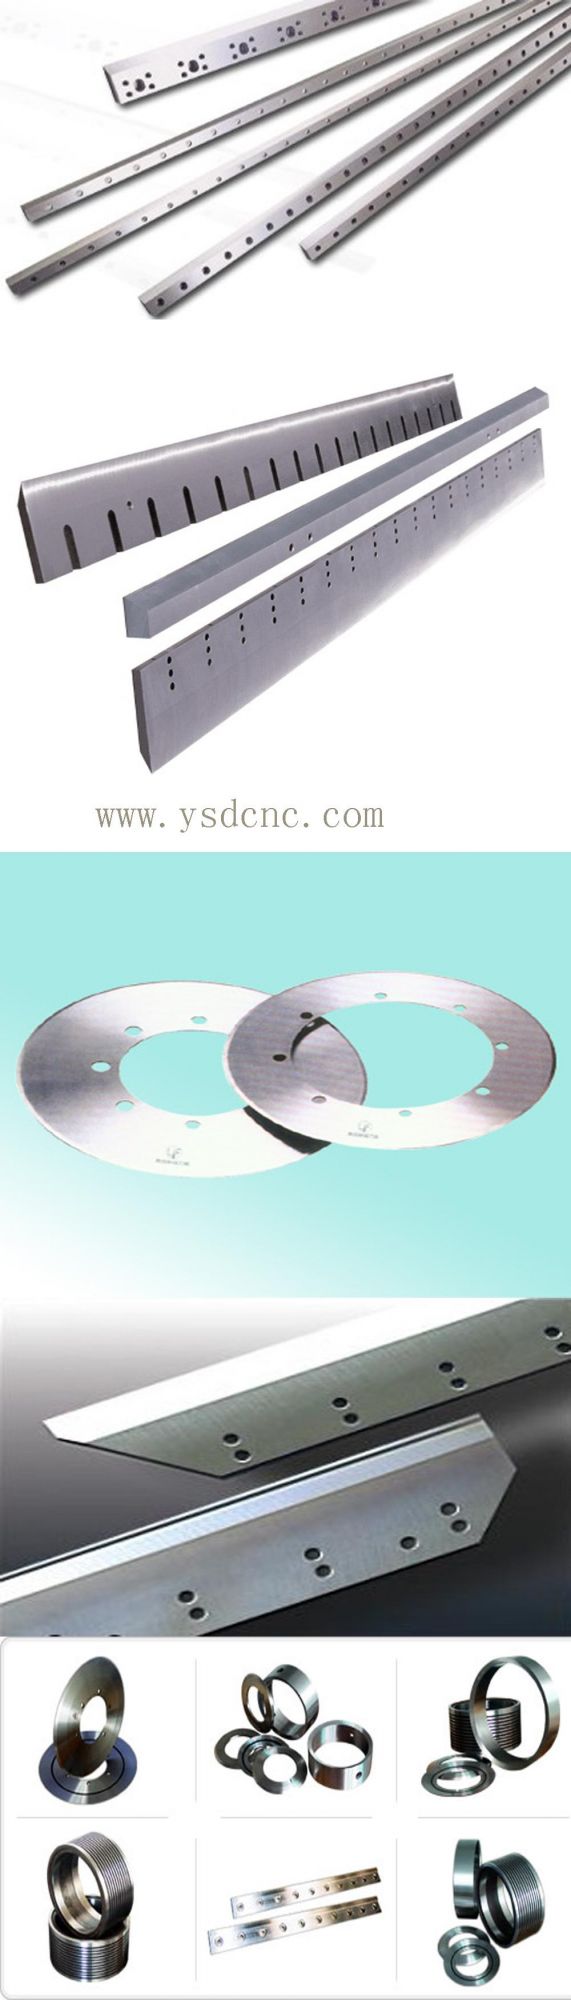 China Supplier Circular Saw Blades for Cutting Paper